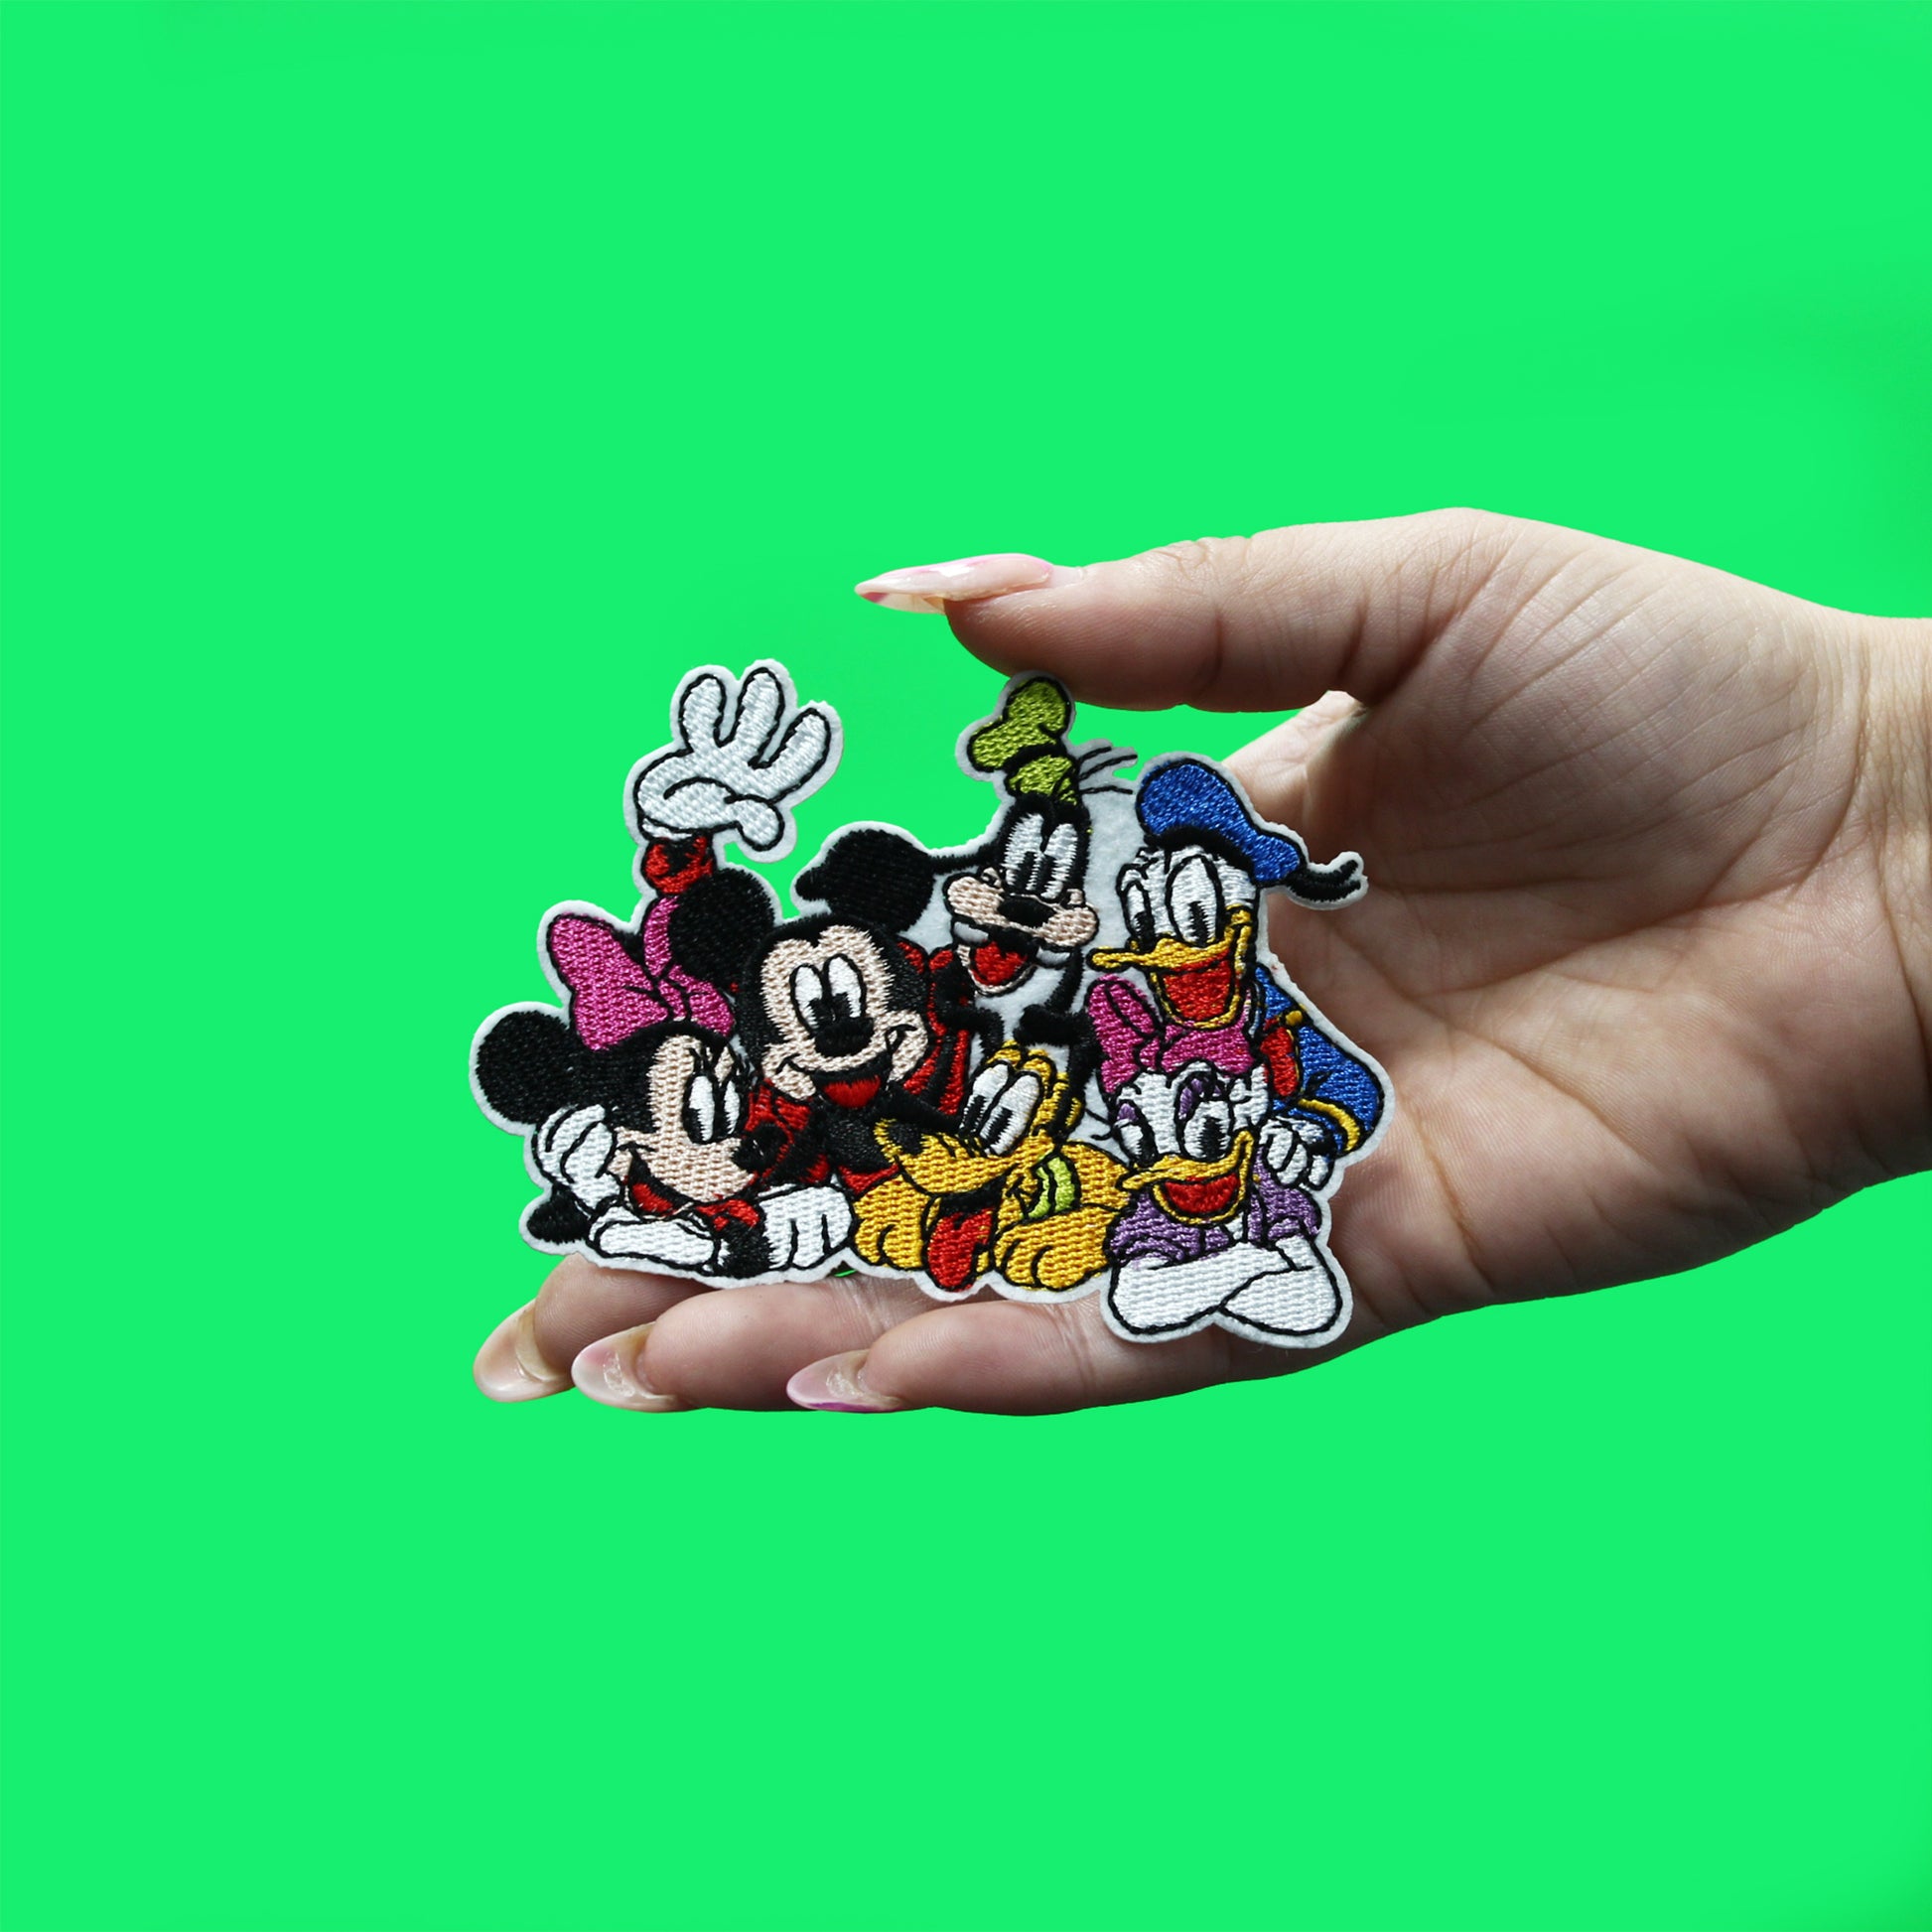 Disney Iron On Patch Set - Best of Mickey Mouse